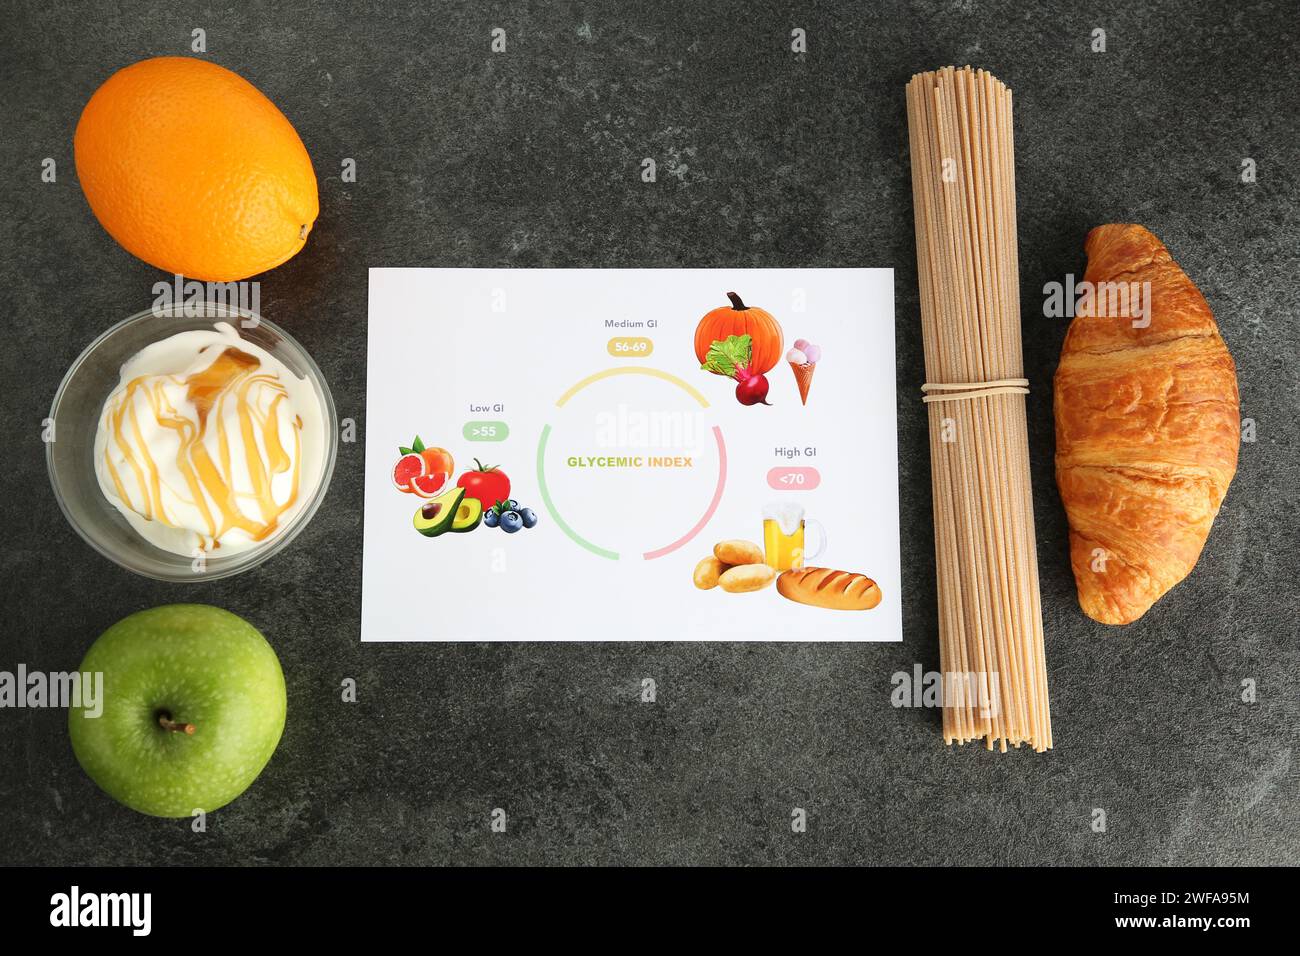 Glycemic index chart and different products on grey table, flat lay Stock Photo